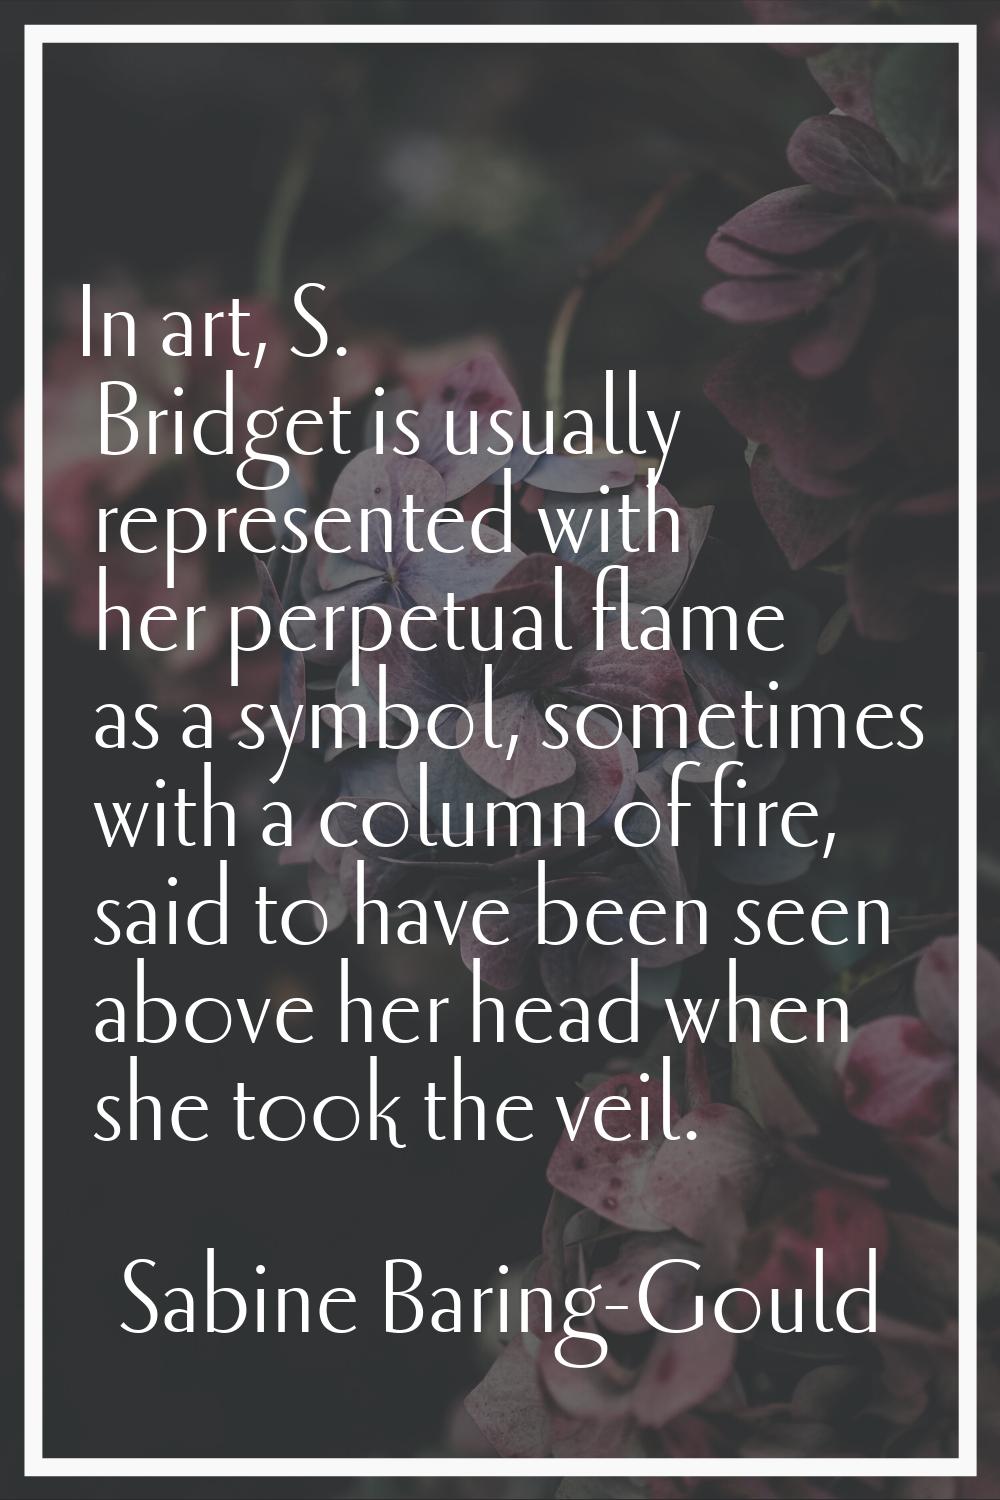 In art, S. Bridget is usually represented with her perpetual flame as a symbol, sometimes with a co